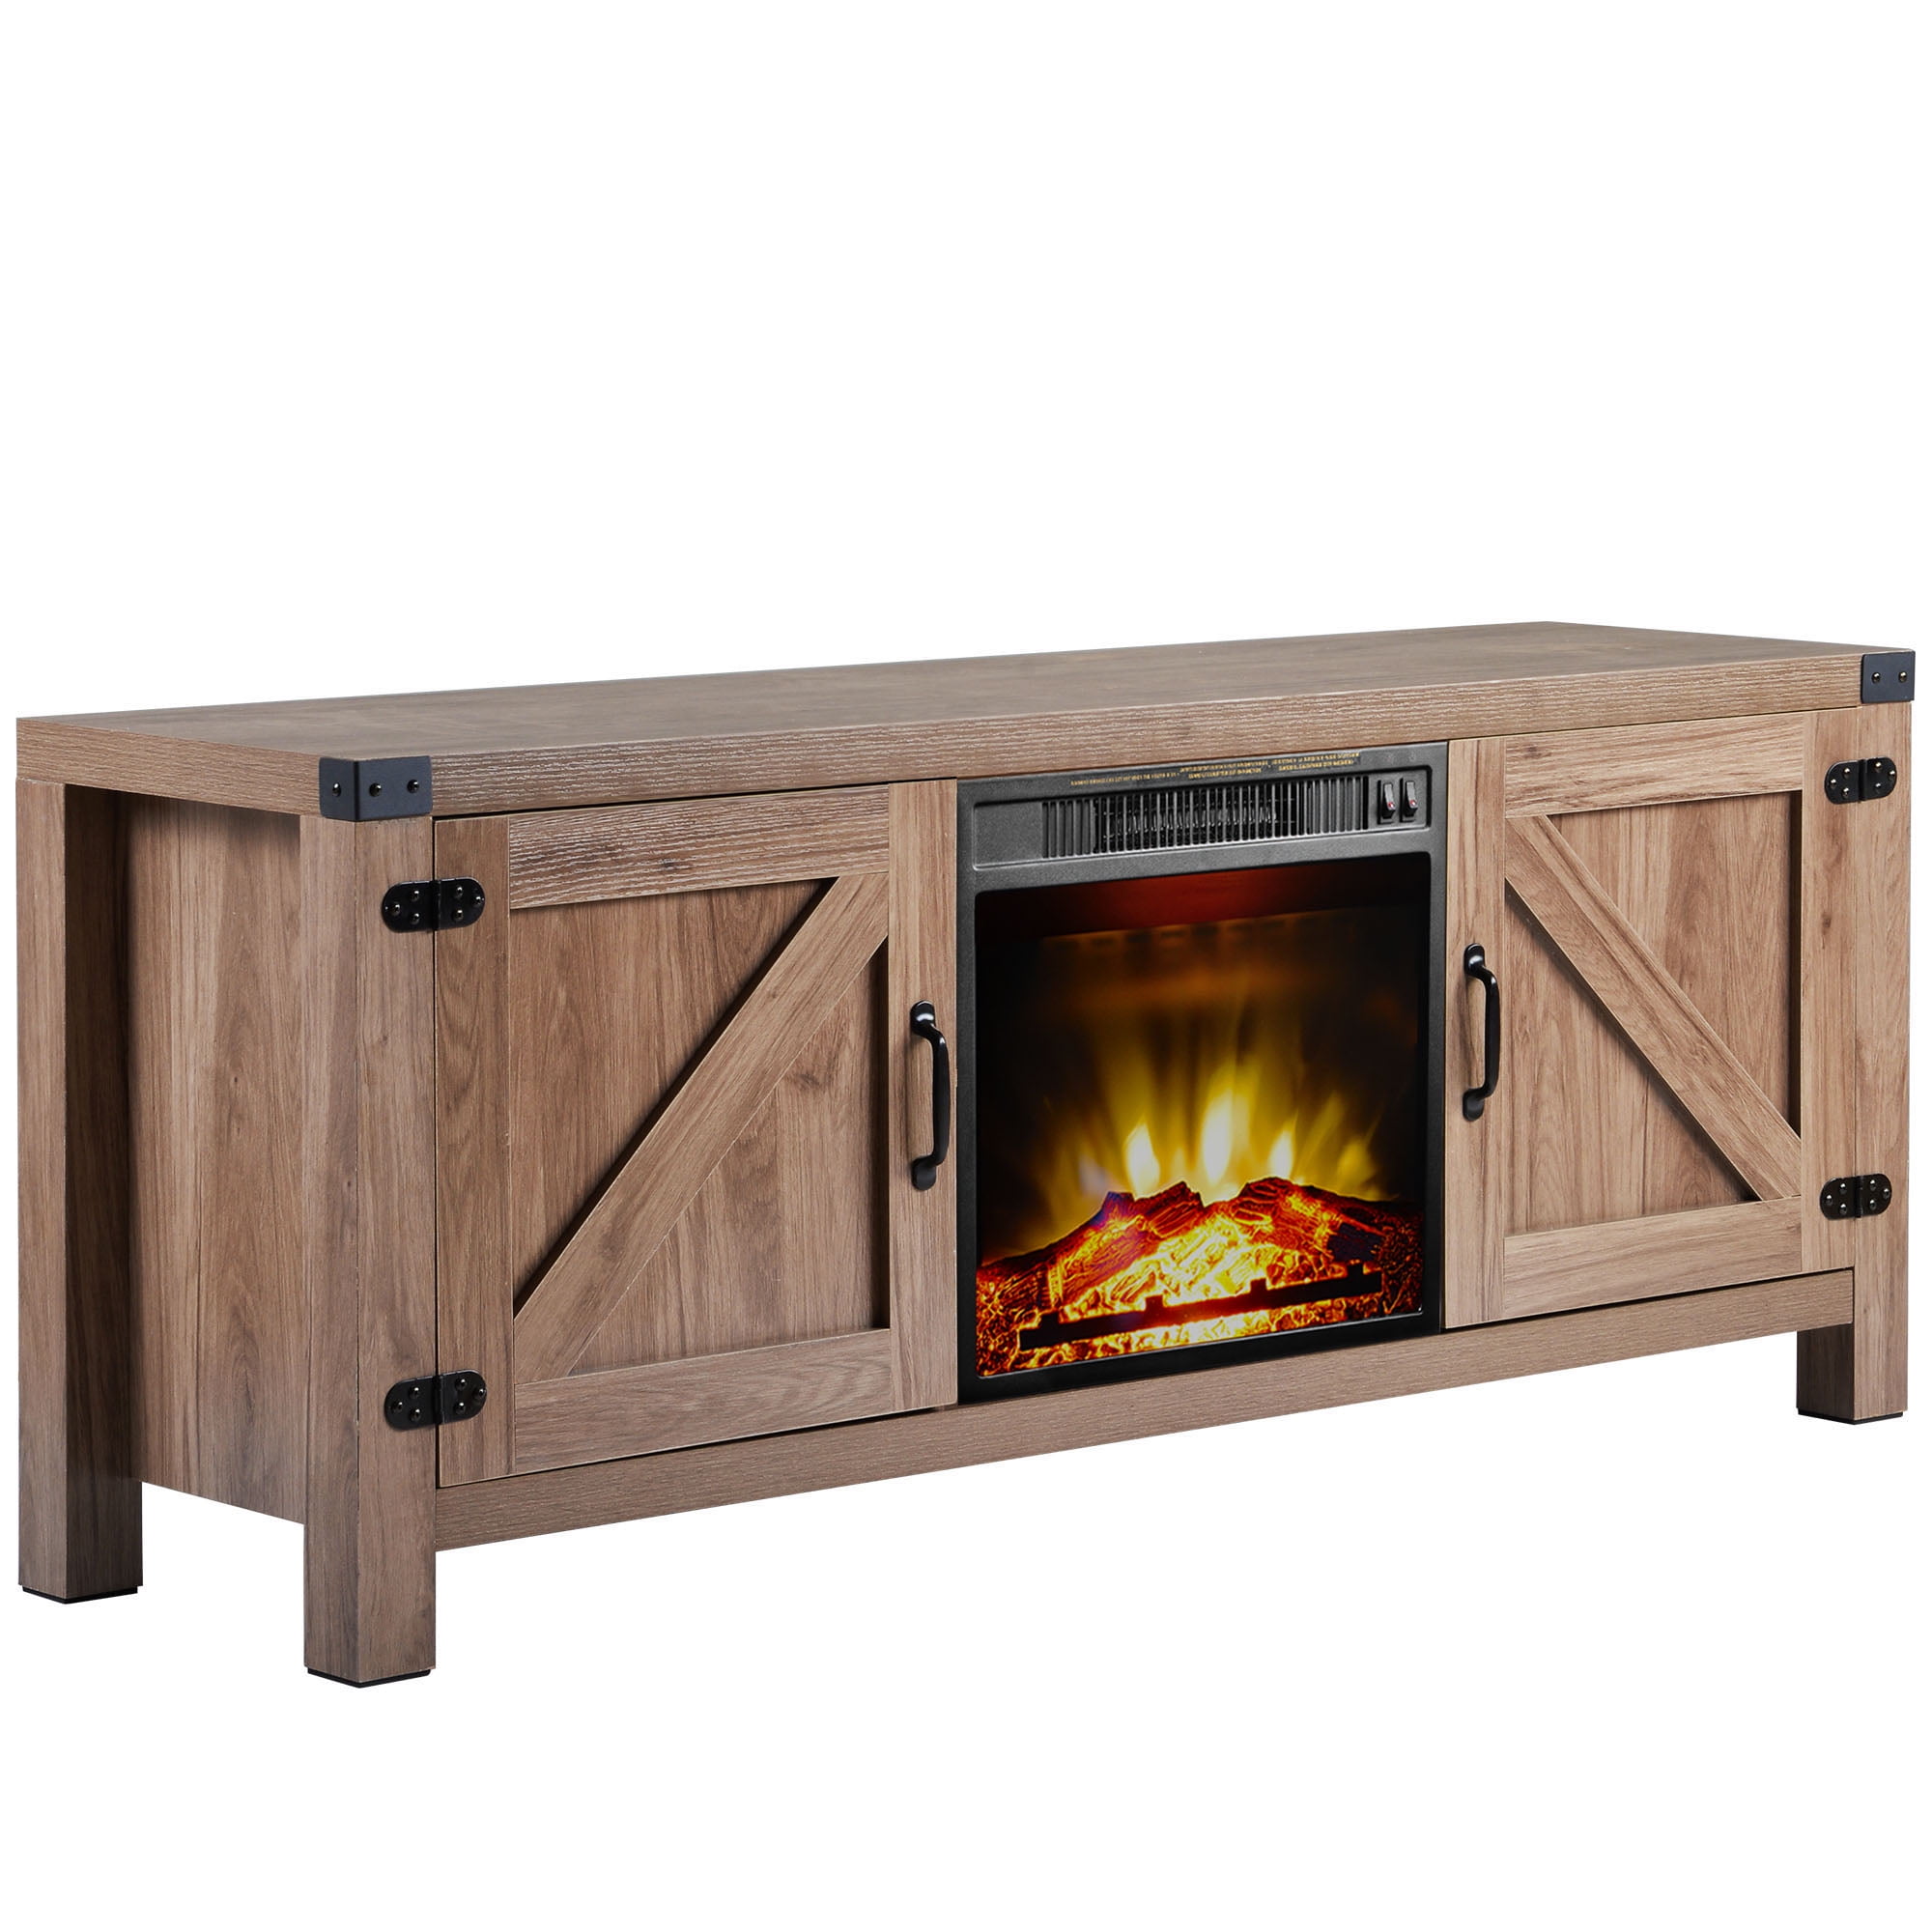 SEGMART Fireplace TV Stands for TVs up to 65", Rustic ...